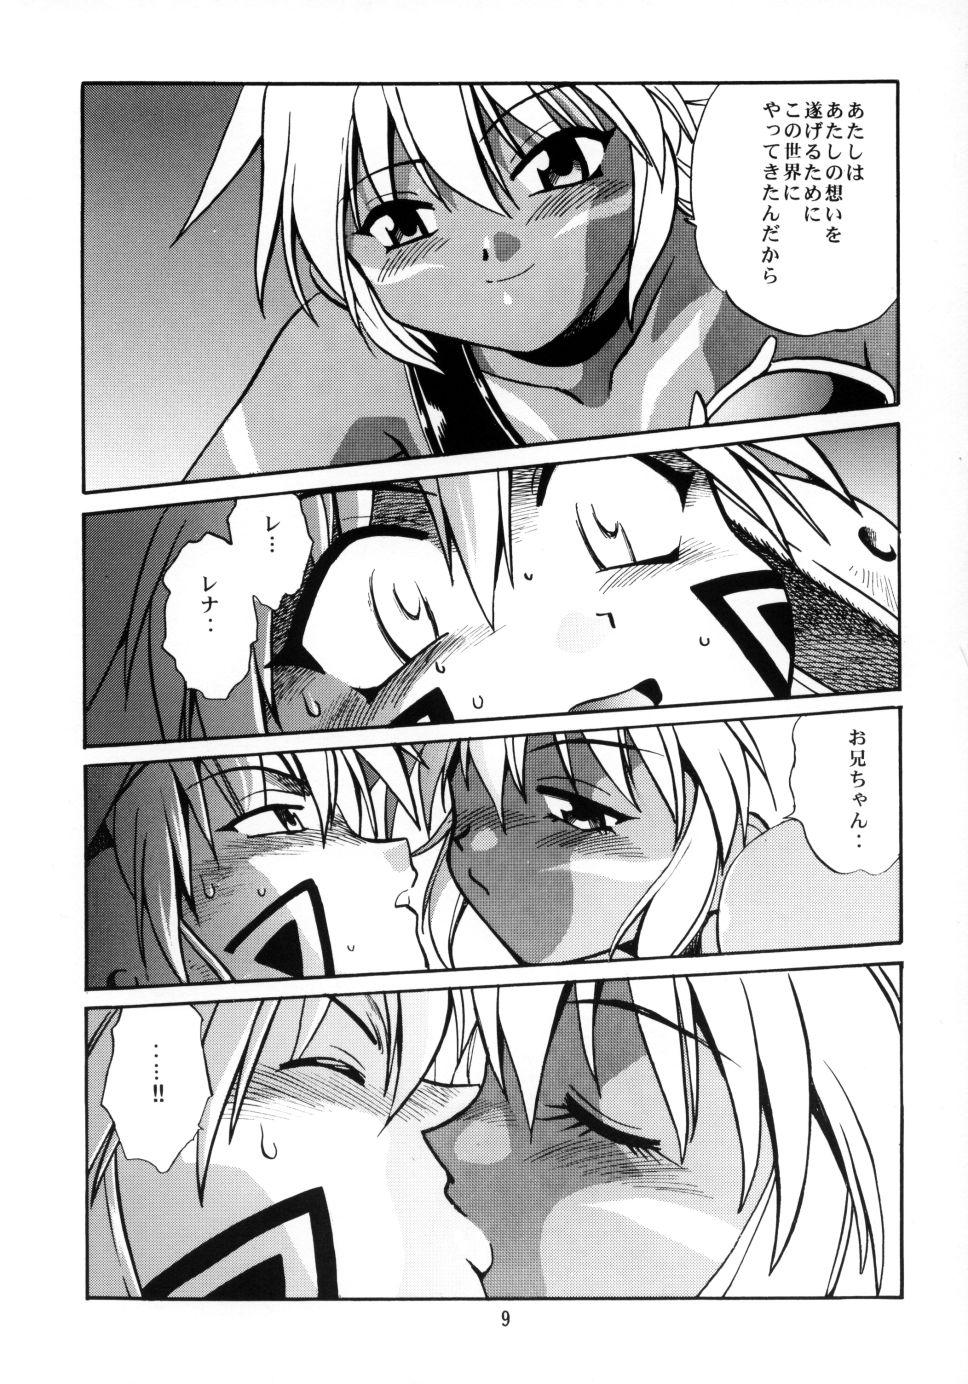 Anal Play .hack//extra - .hacklegend of the twilight Neighbor - Page 8